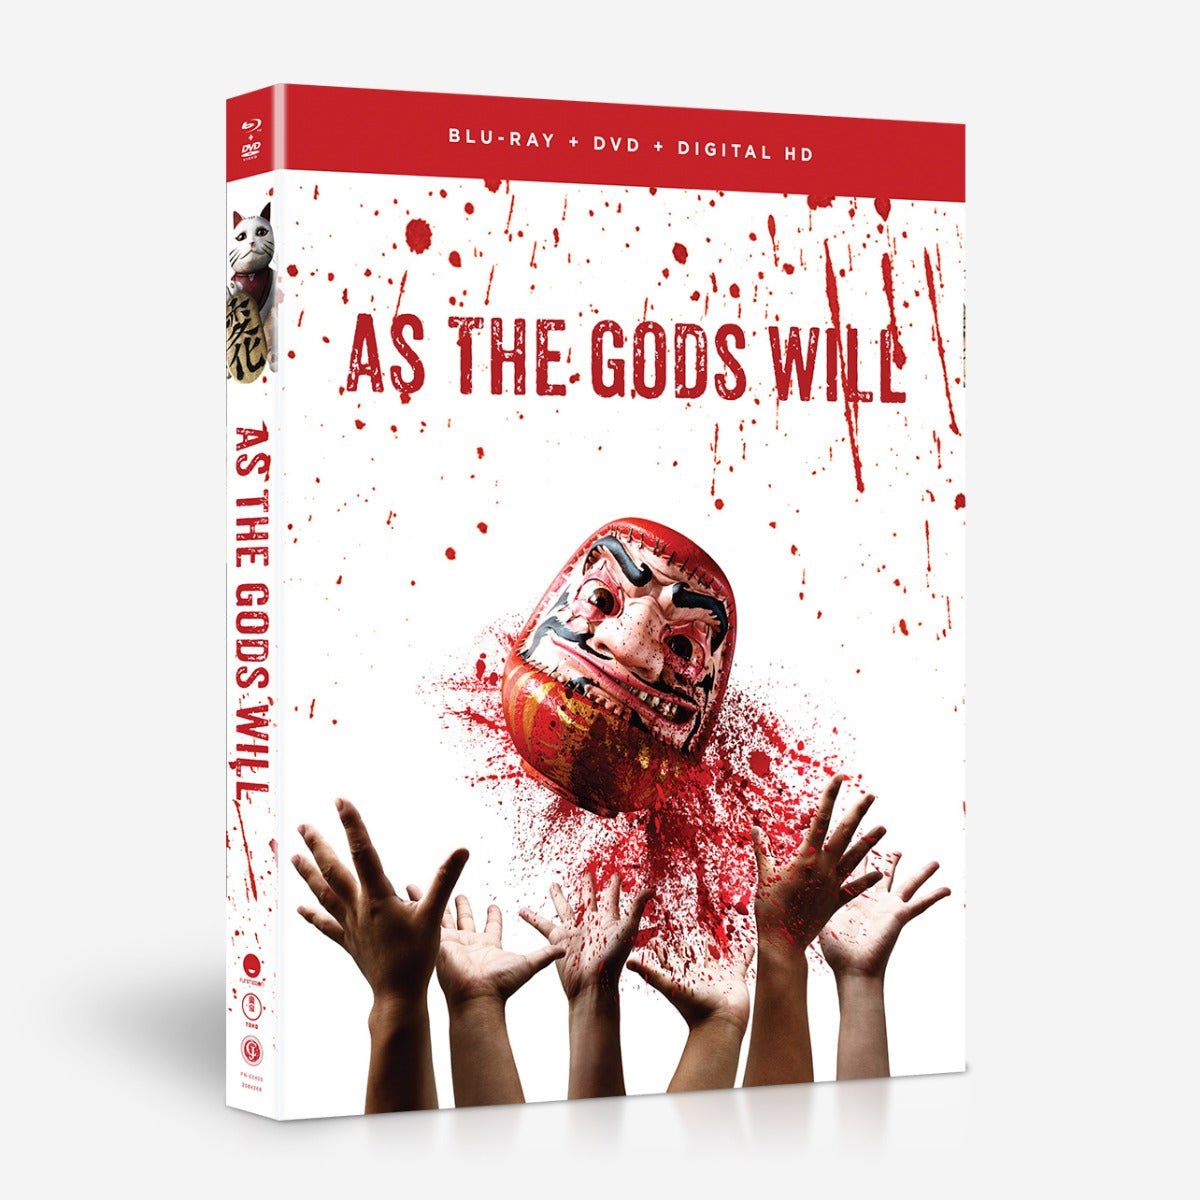 As the Gods Will - Live Action Movie - Blu-ray + DVD image count 0